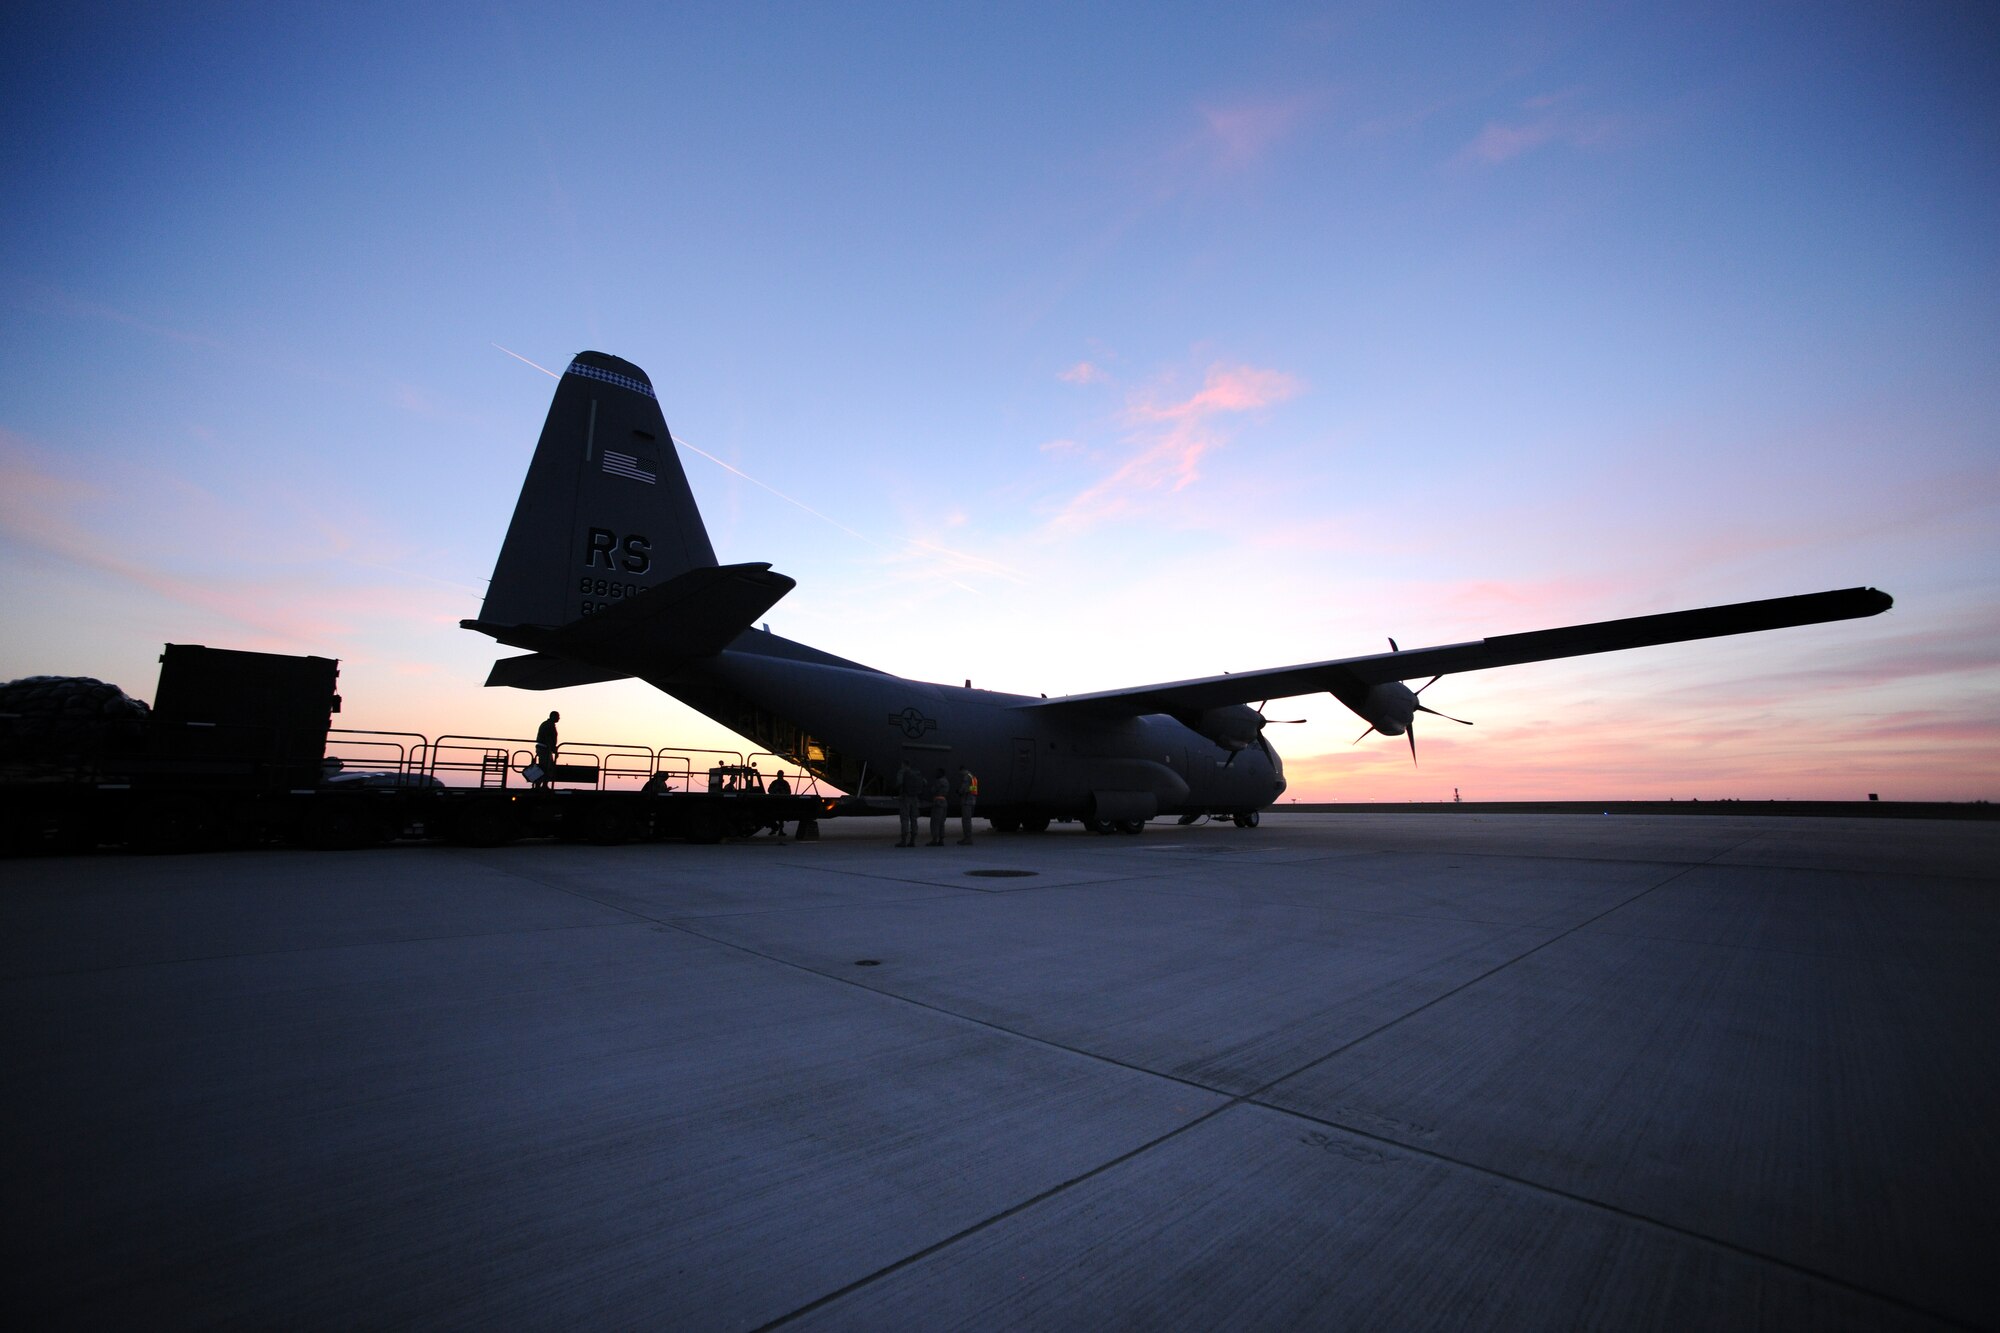 SPANGDAHLEM AIR BASE, Germany – A C-130J Super Hercules from the 37th Airlift Squadron, Ramstein Air Base, Germany, waits to be loaded with cargo here in support of Operation Odyssey Dawn March 21. Joint Task Force Odyssey Dawn is the U.S. Africa Command task force established to provide operational and tactical command and control of U.S. military forces supporting the international response to the unrest in Libya and enforcement of United Nations Security Council Resolution (UNSCR) 1973. UNSCR 1973 authorizes all necessary measures to protect civilians in Libya under threat of attack by Qadhafi regime forces.  JTF Odyssey Dawn is commanded by U.S. Navy Admiral Samuel J. Locklear, III. (U.S. Air Force photo/Senior Airman Nathanael Callon)